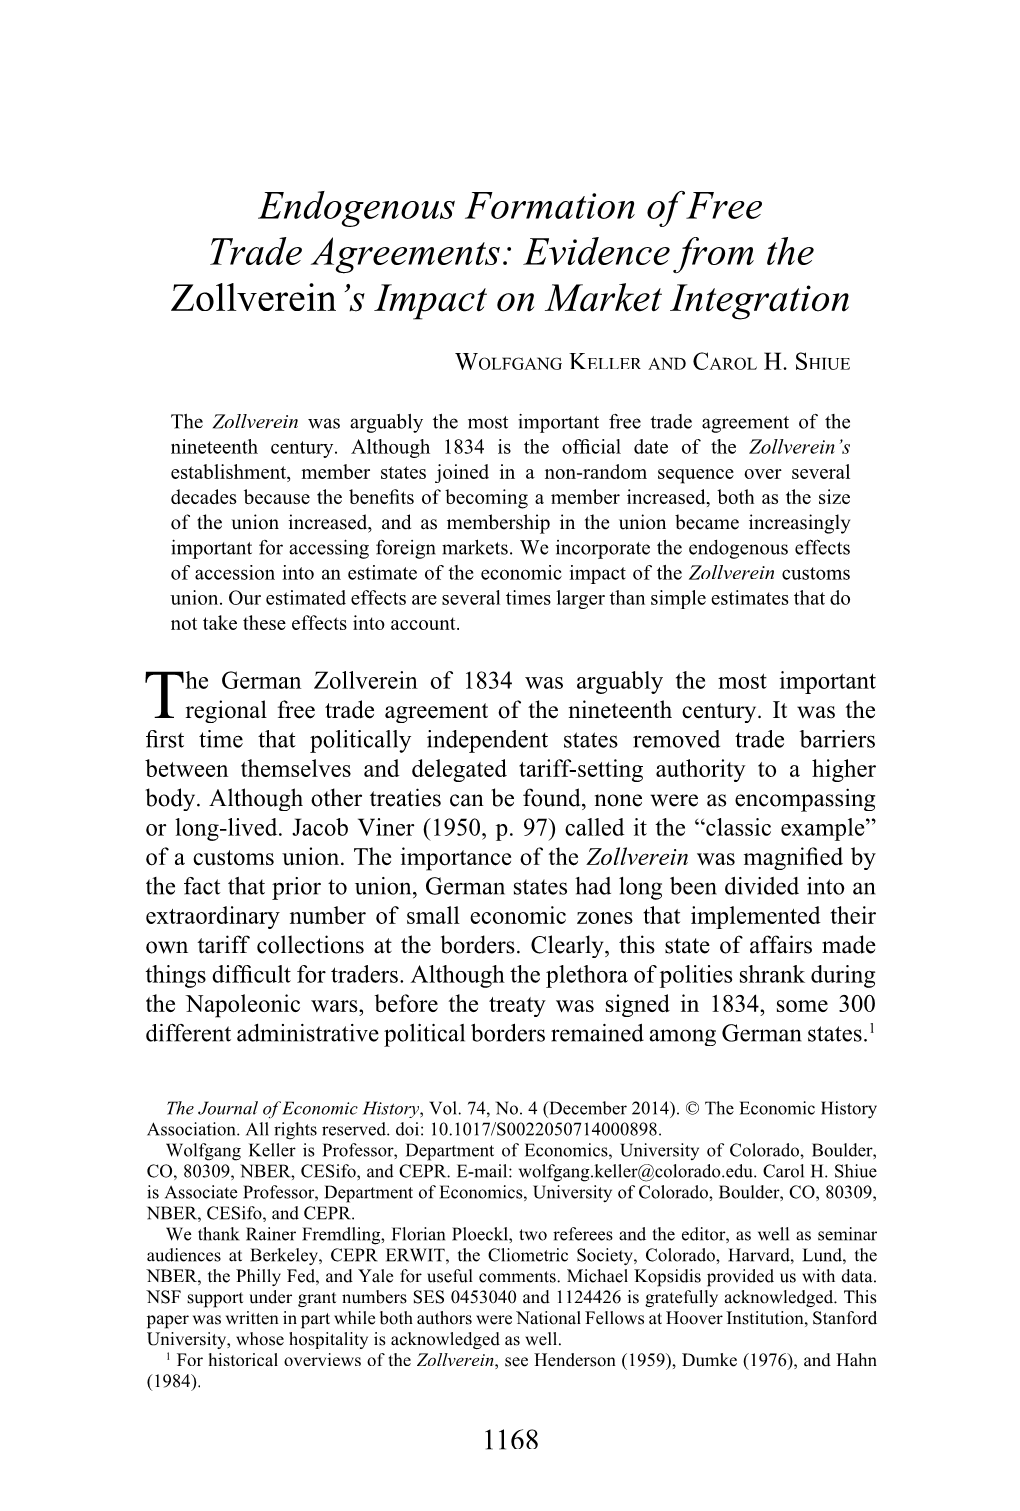 Endogenous Formation of Free Trade Agreements: Evidence from the Zollverein’S Impact on Market Integration